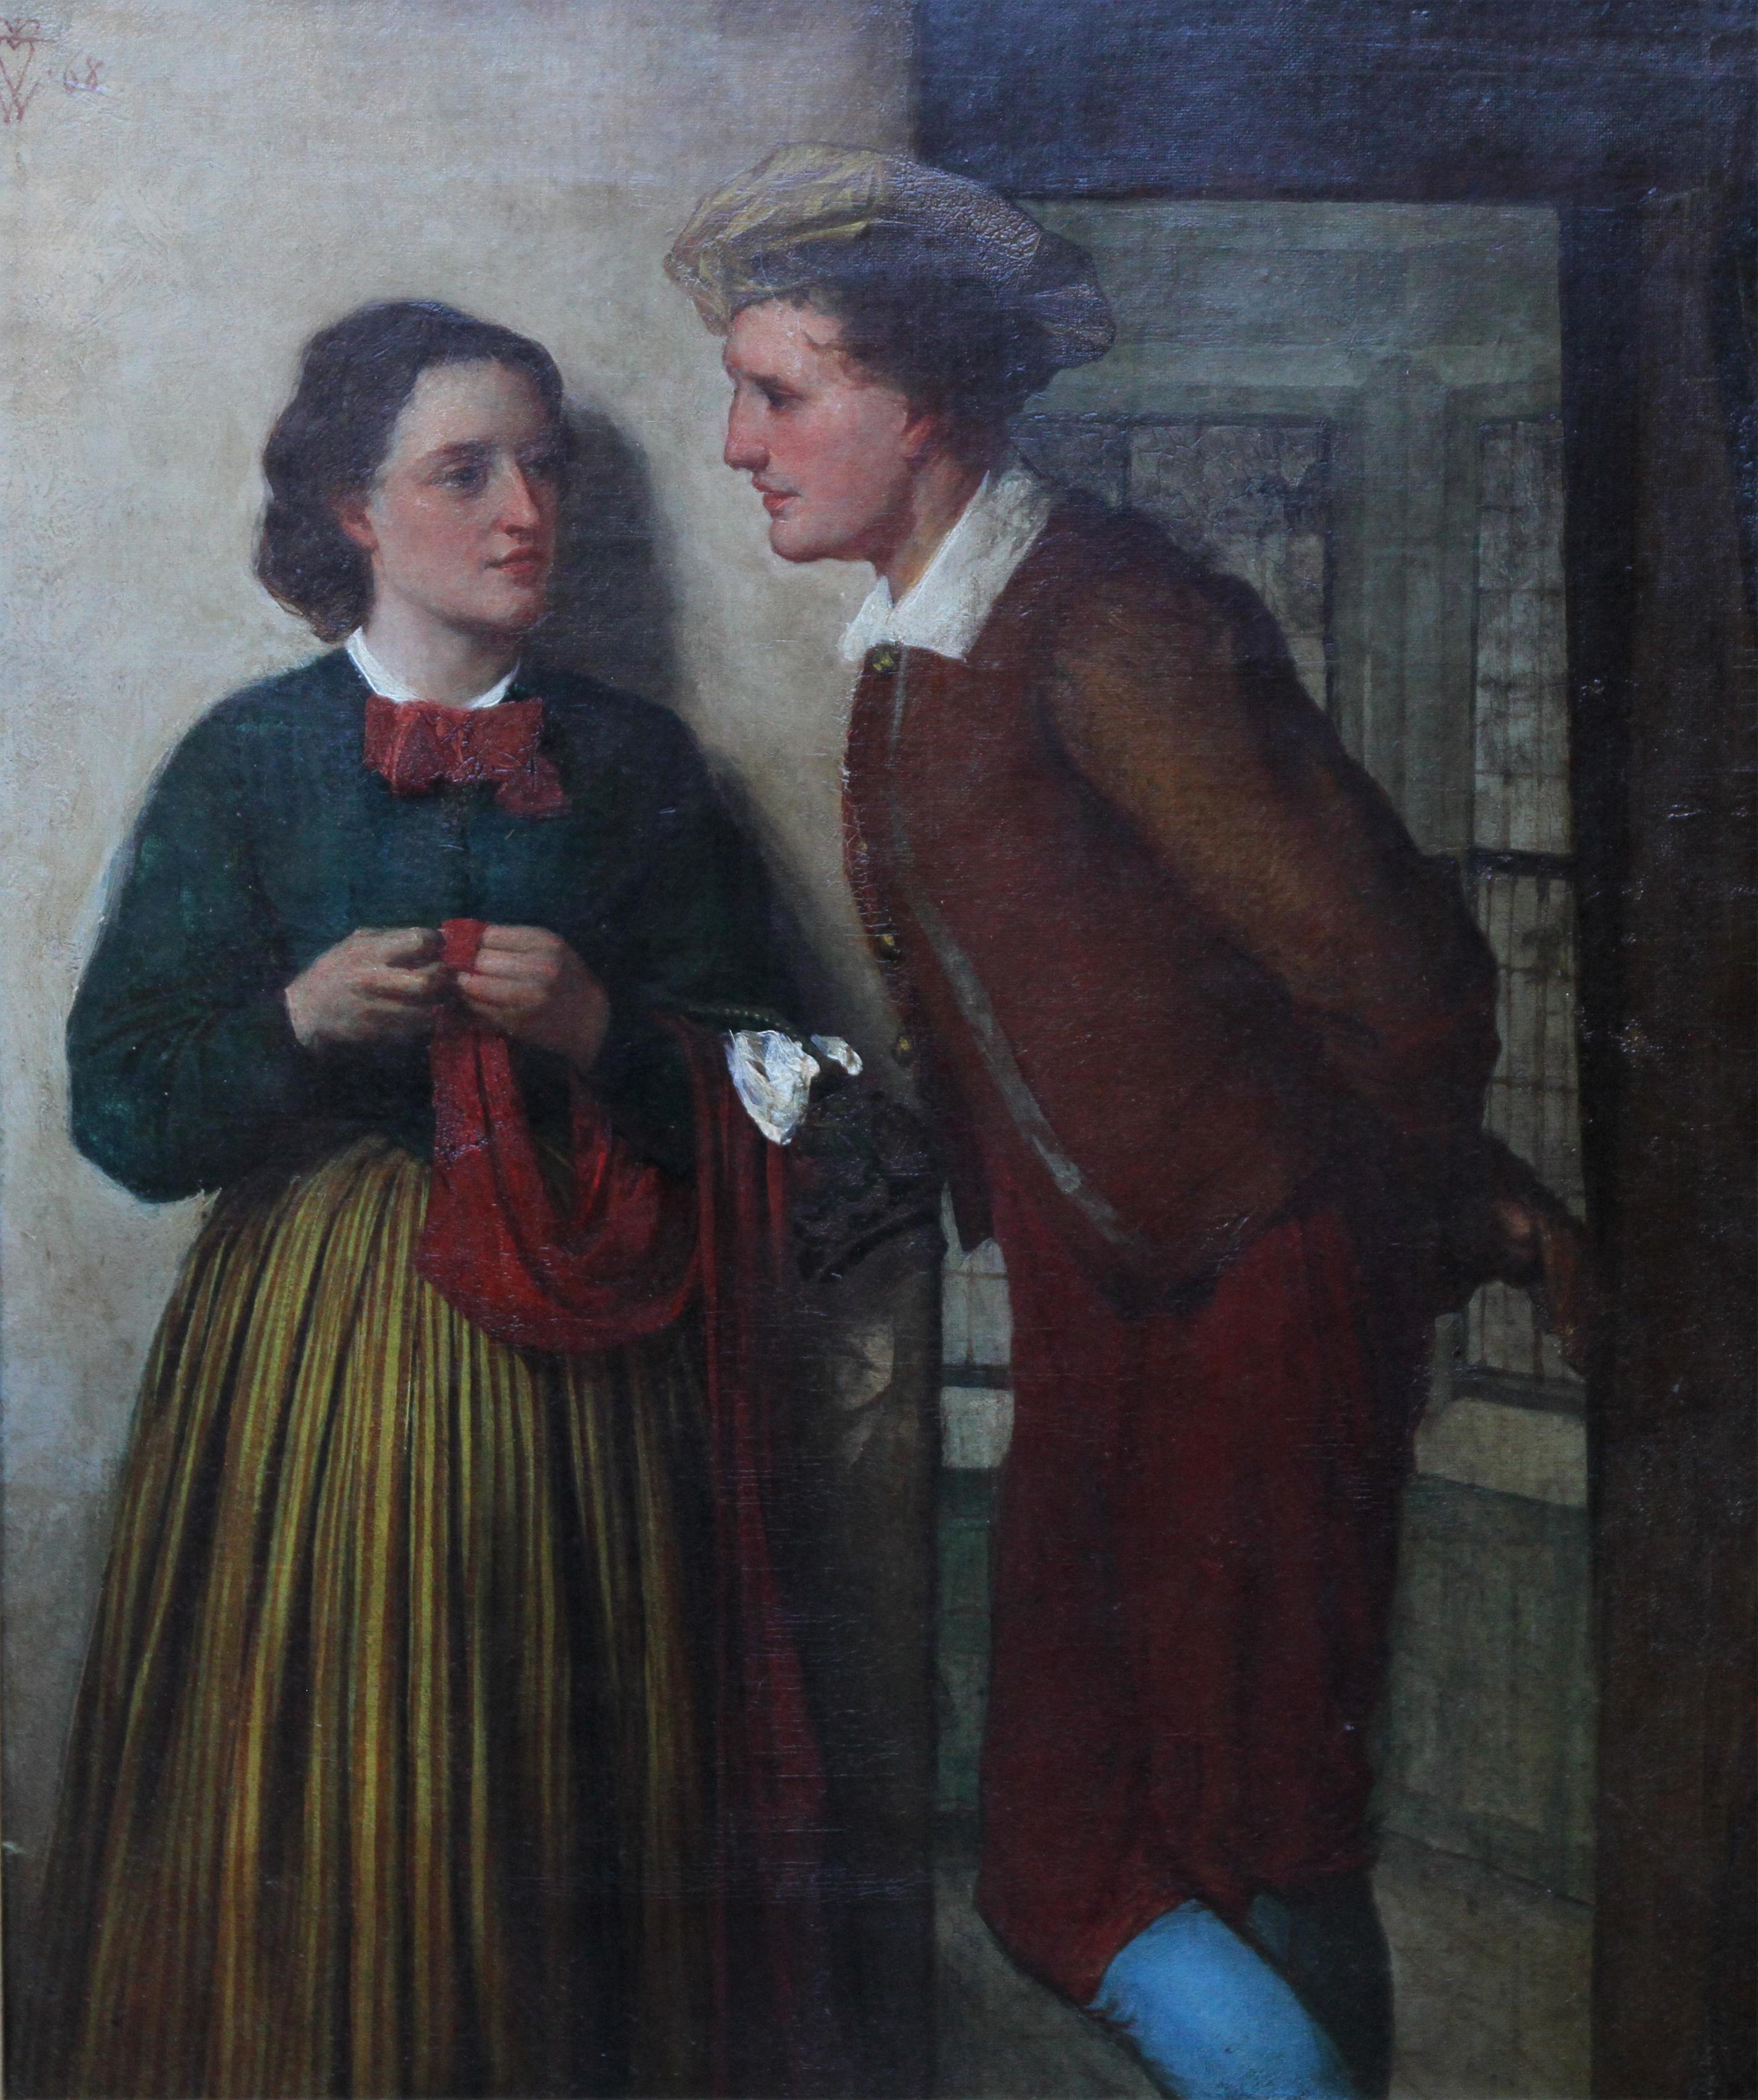 A fine Victorian Scottish genre oil on canvas painting which dates to 1868 and is titled The Gossip by famous Scottish artist William Fettes Douglas RSA. It is a stunning depiction of a courting couple in very good condition. It is a very evocative